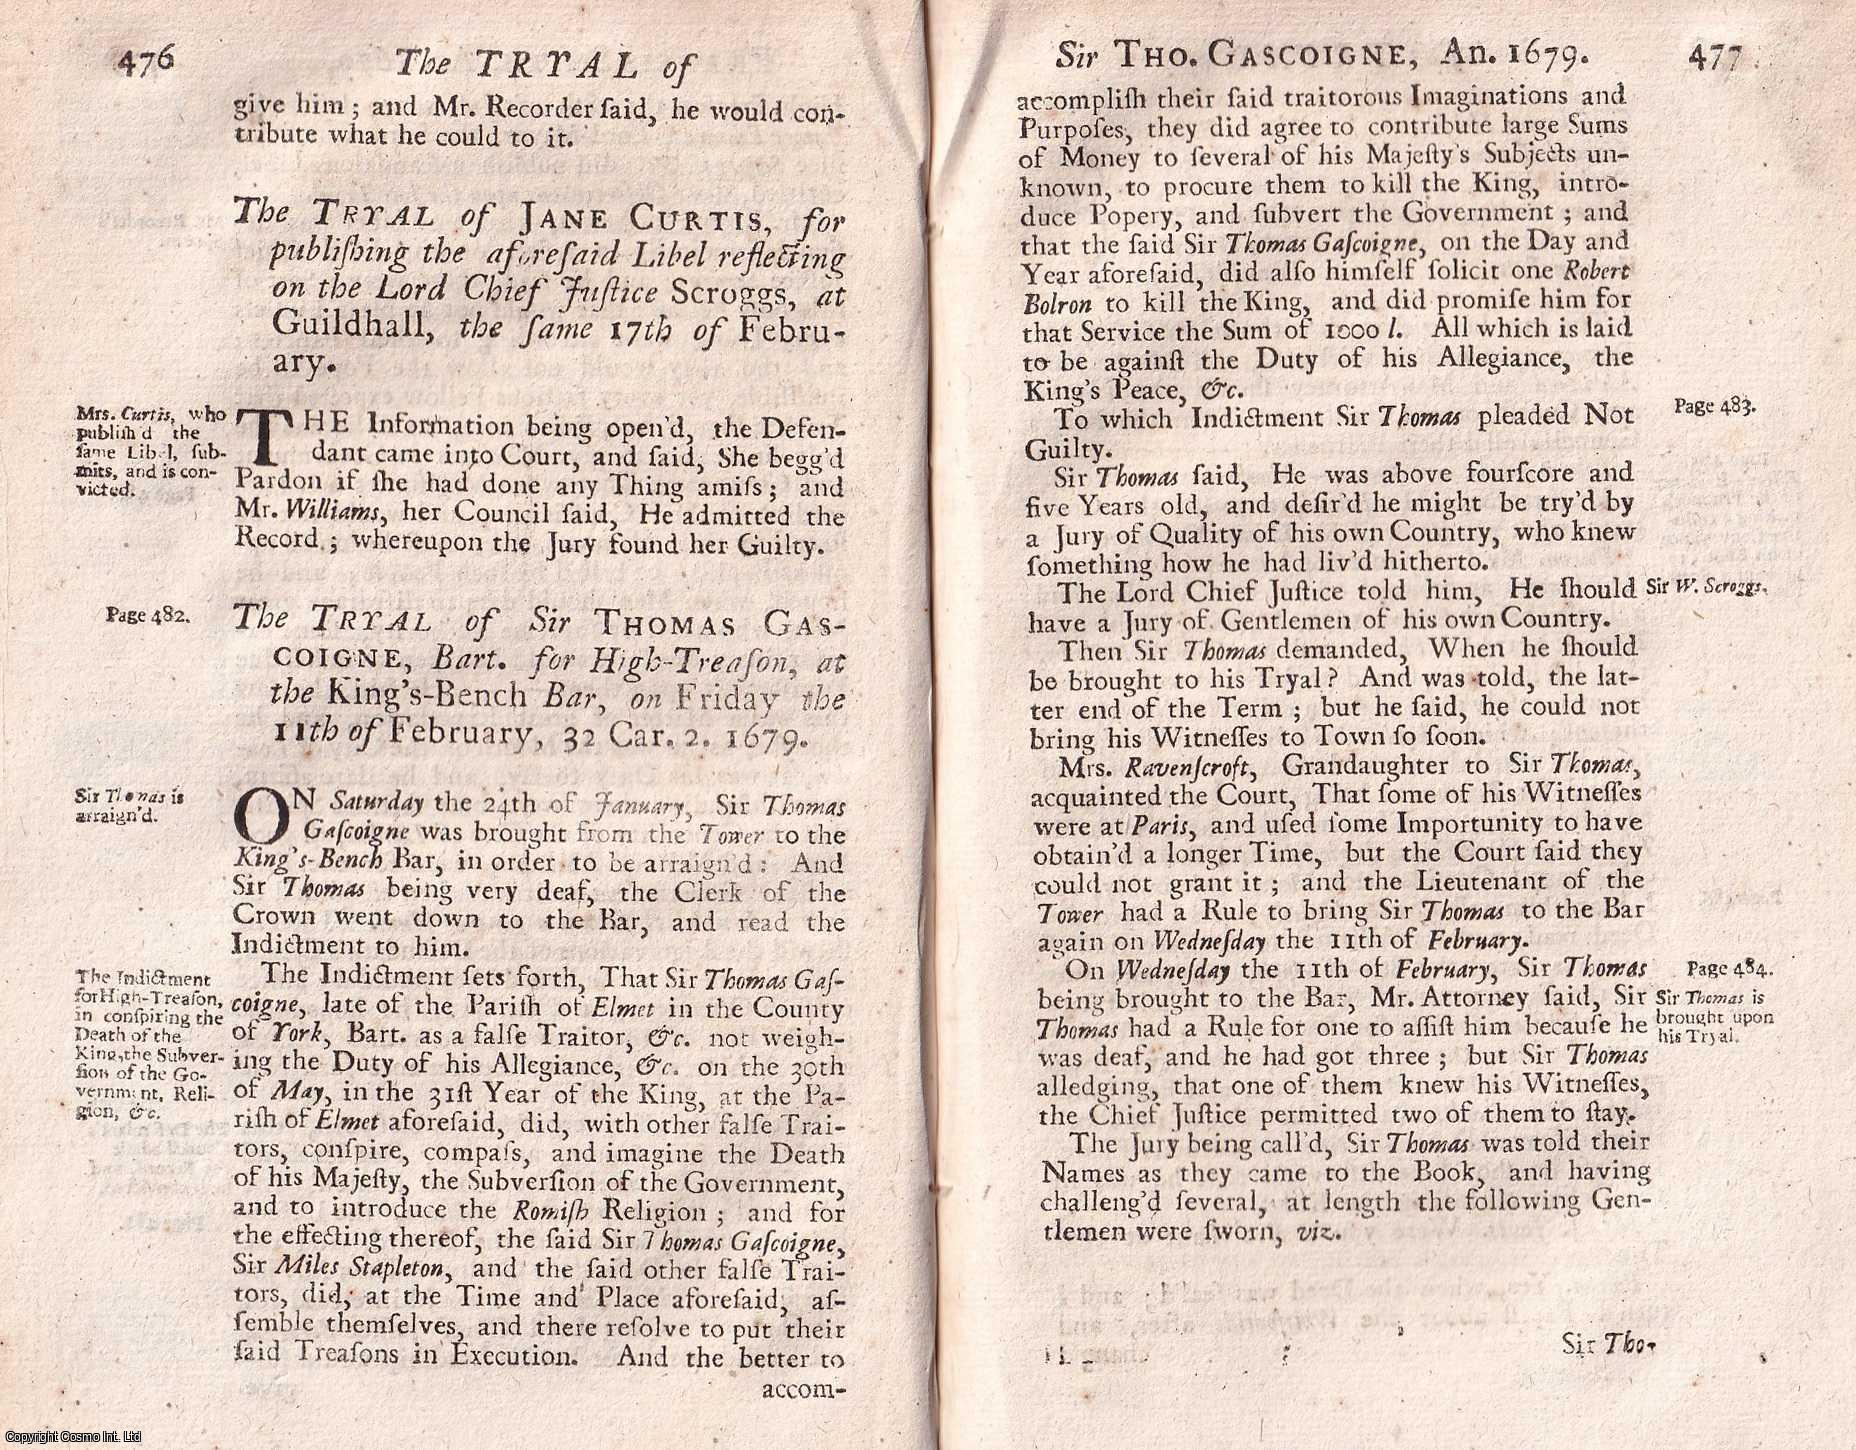 [Trial] - The Trial of Sir Thomas Gasgoigne, at The King's Bench For High Treason, 1679. An original report from the collected Tryals for High Treason, and Other Crimes, 1720.